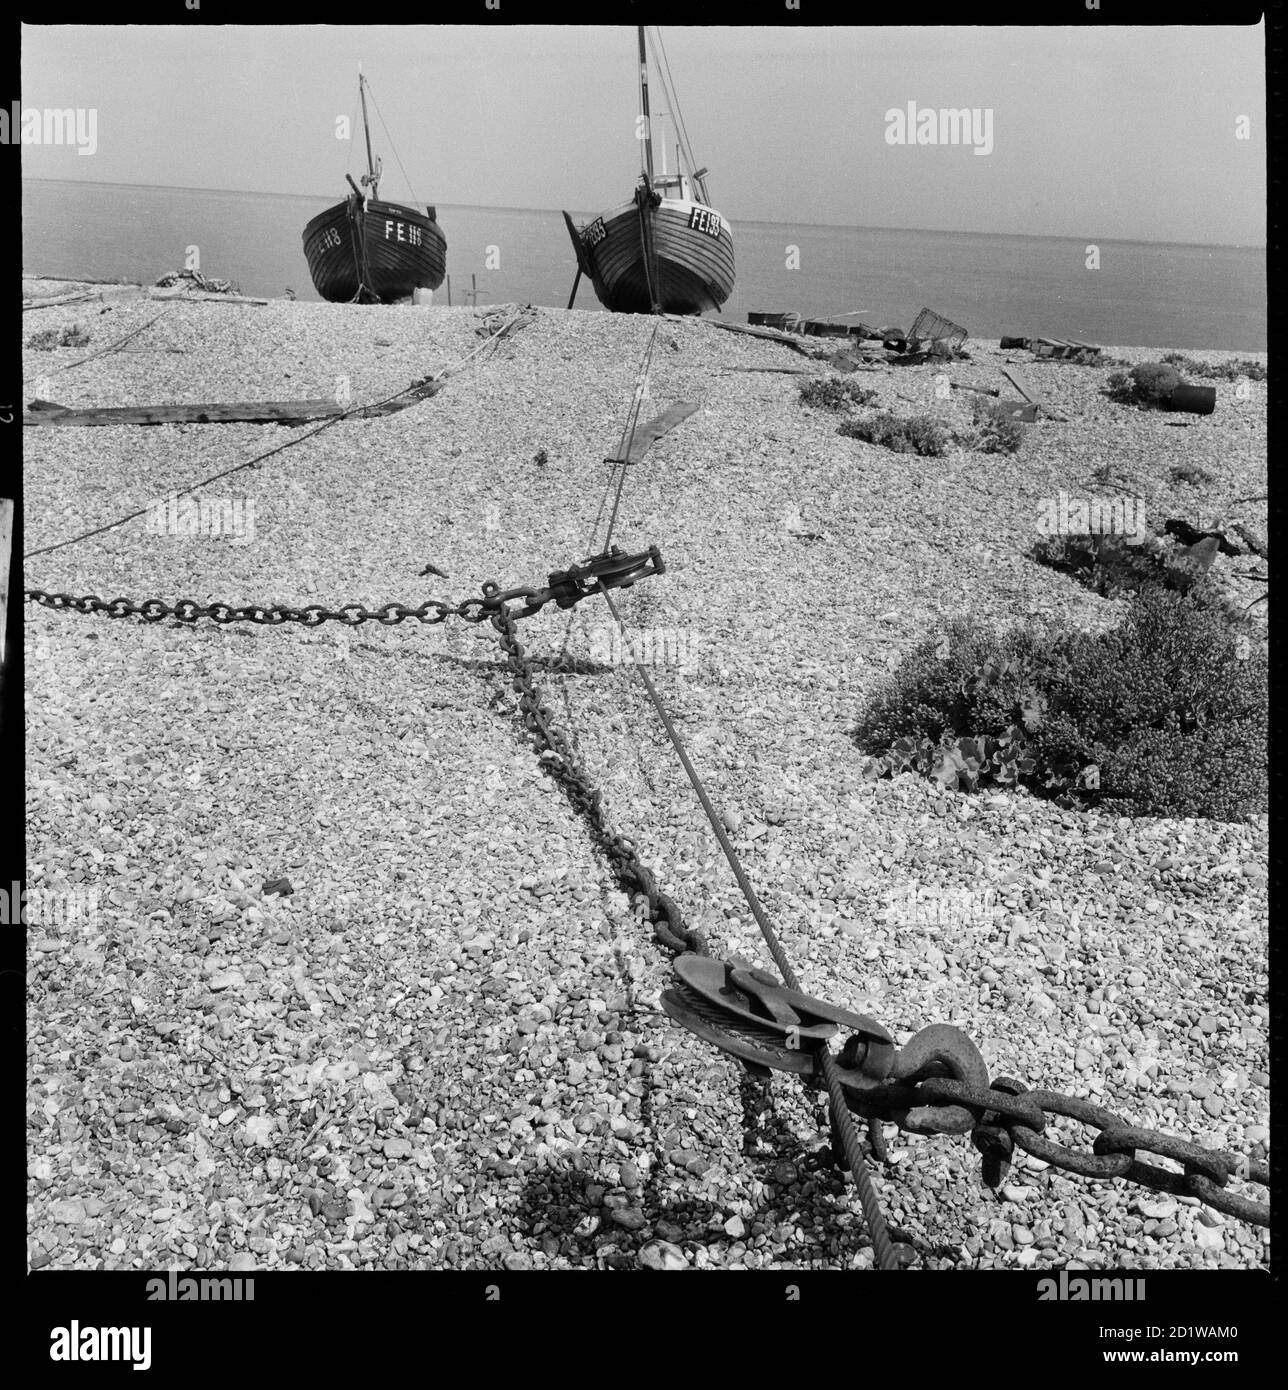 Dungeness, Lydd, Shepway, Kent. A view along the beach towards a pair of fishing boats with a winch in the foreground. Stock Photo